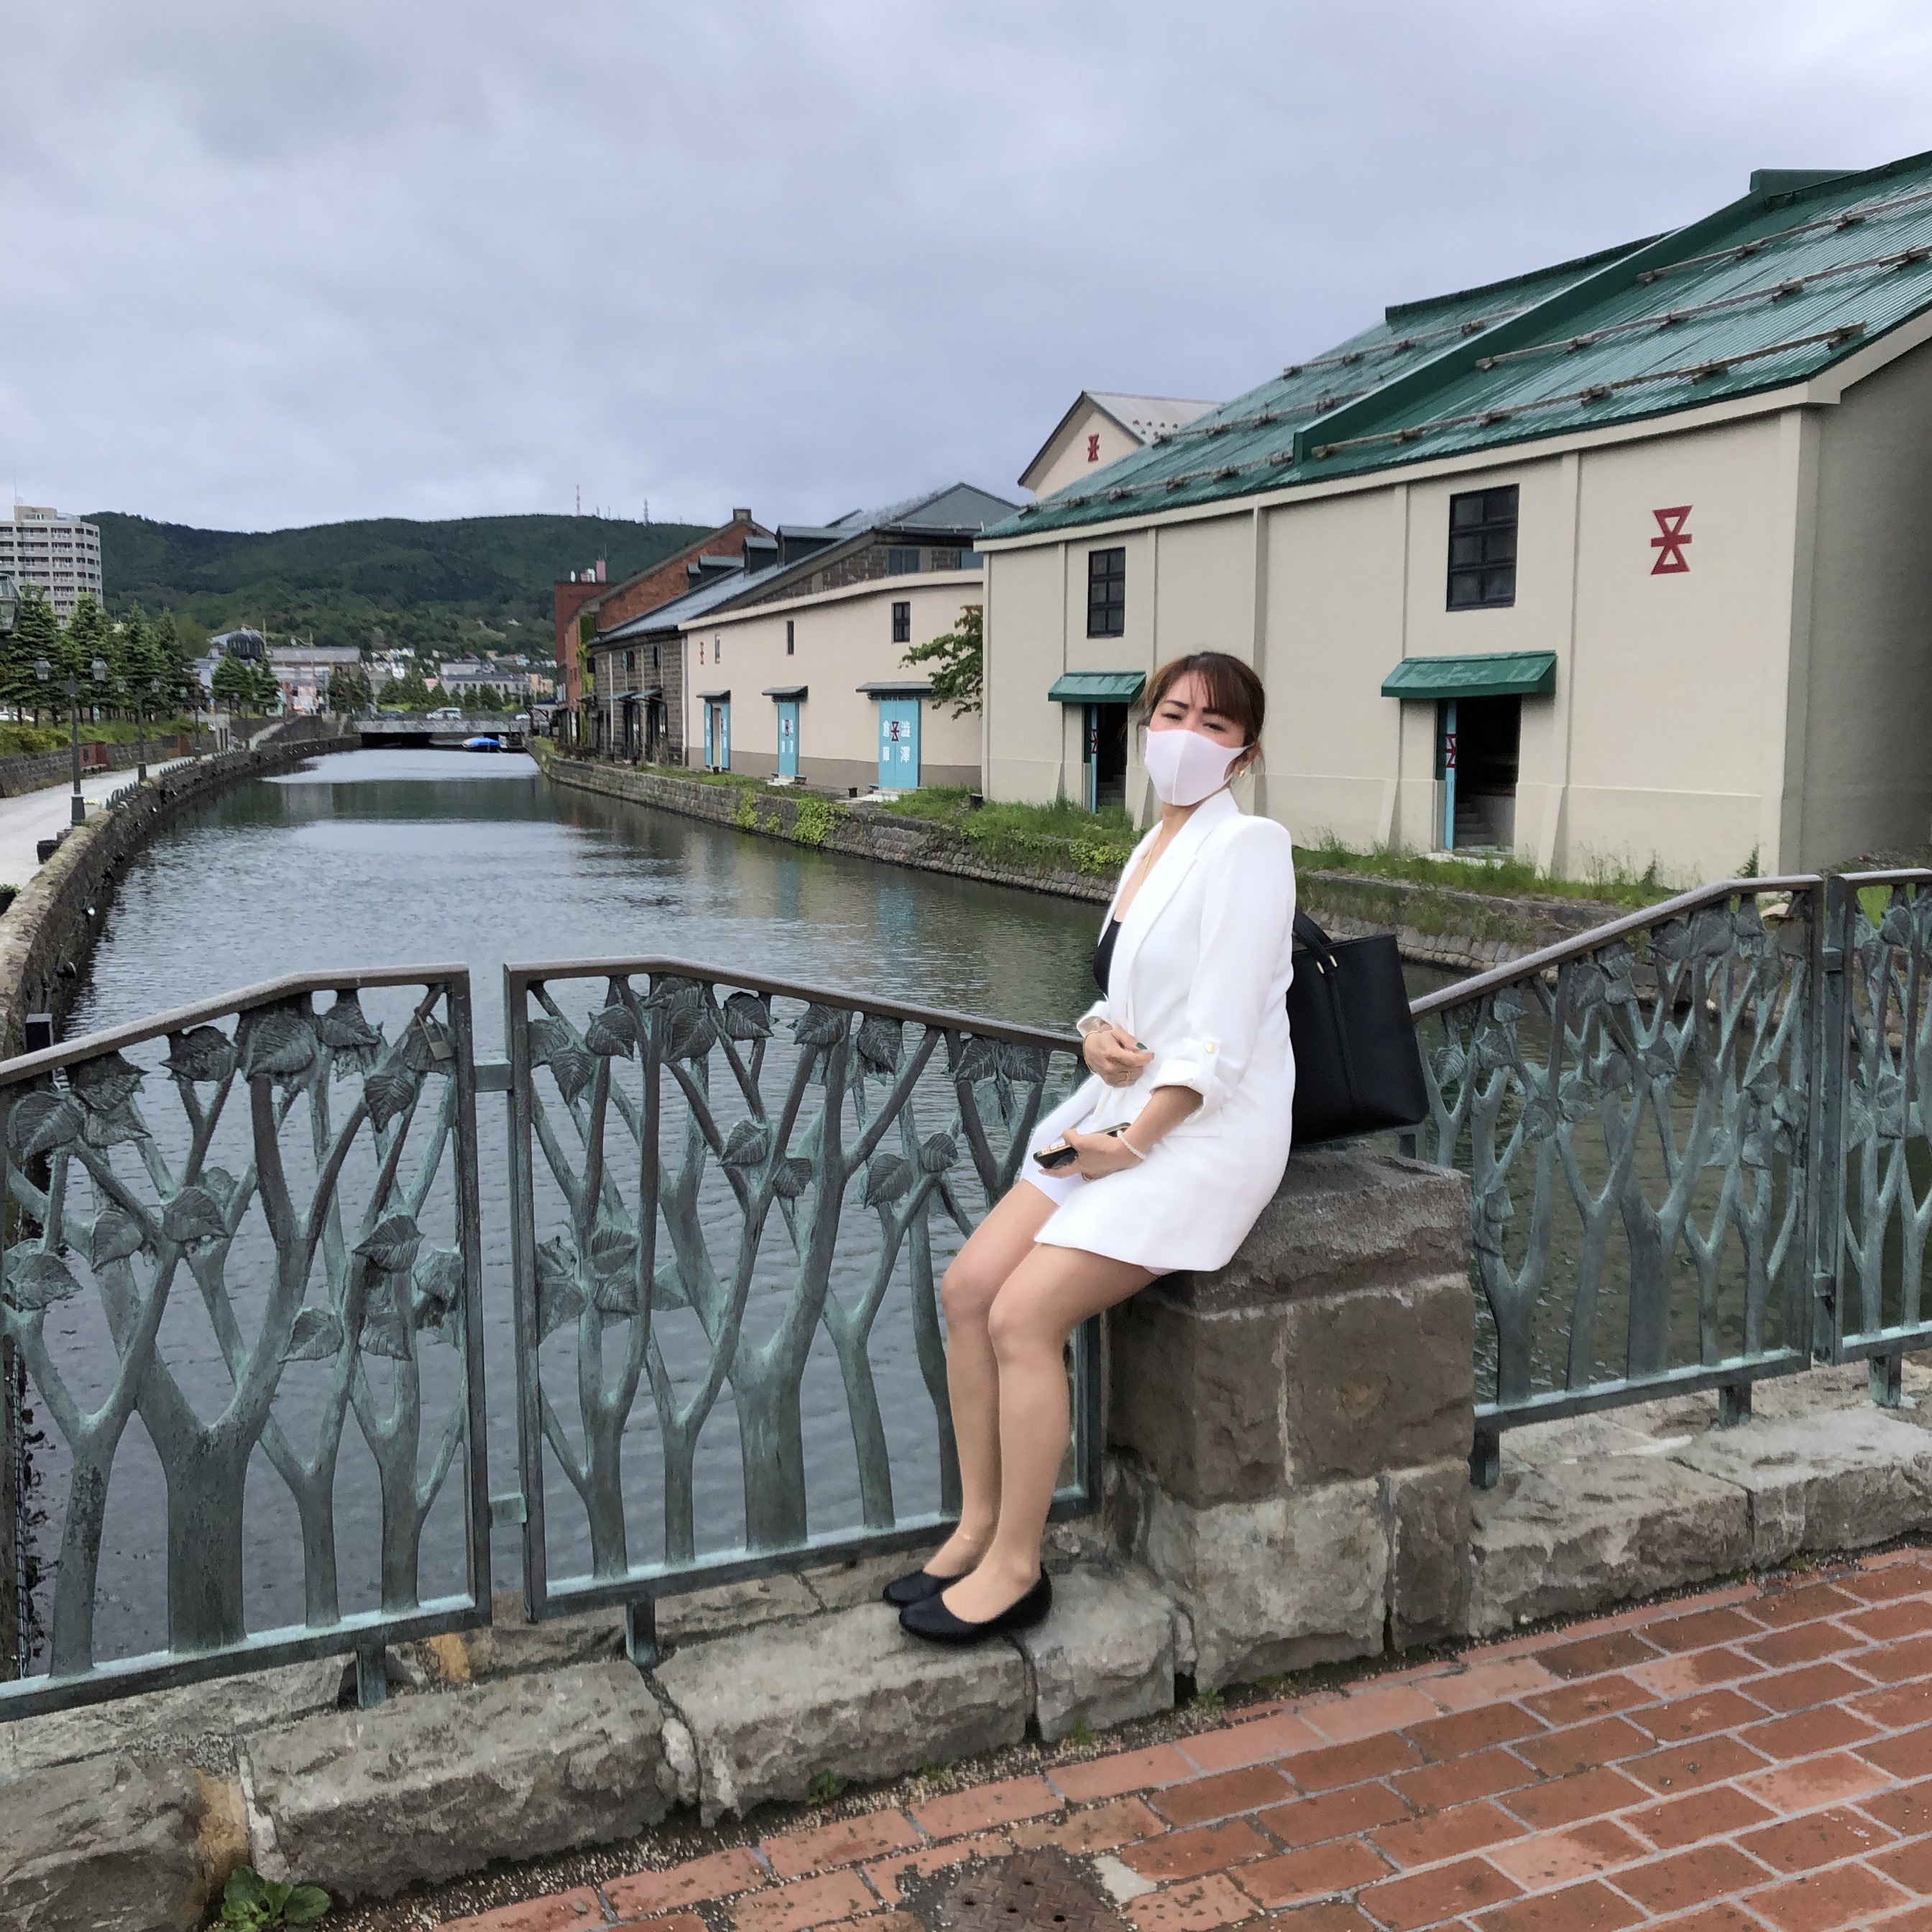 Hokkaido Is The Place To Soak Up The Hot Springs During The Snowy Season Travel Notes And Guides Trip Com Travel Guides